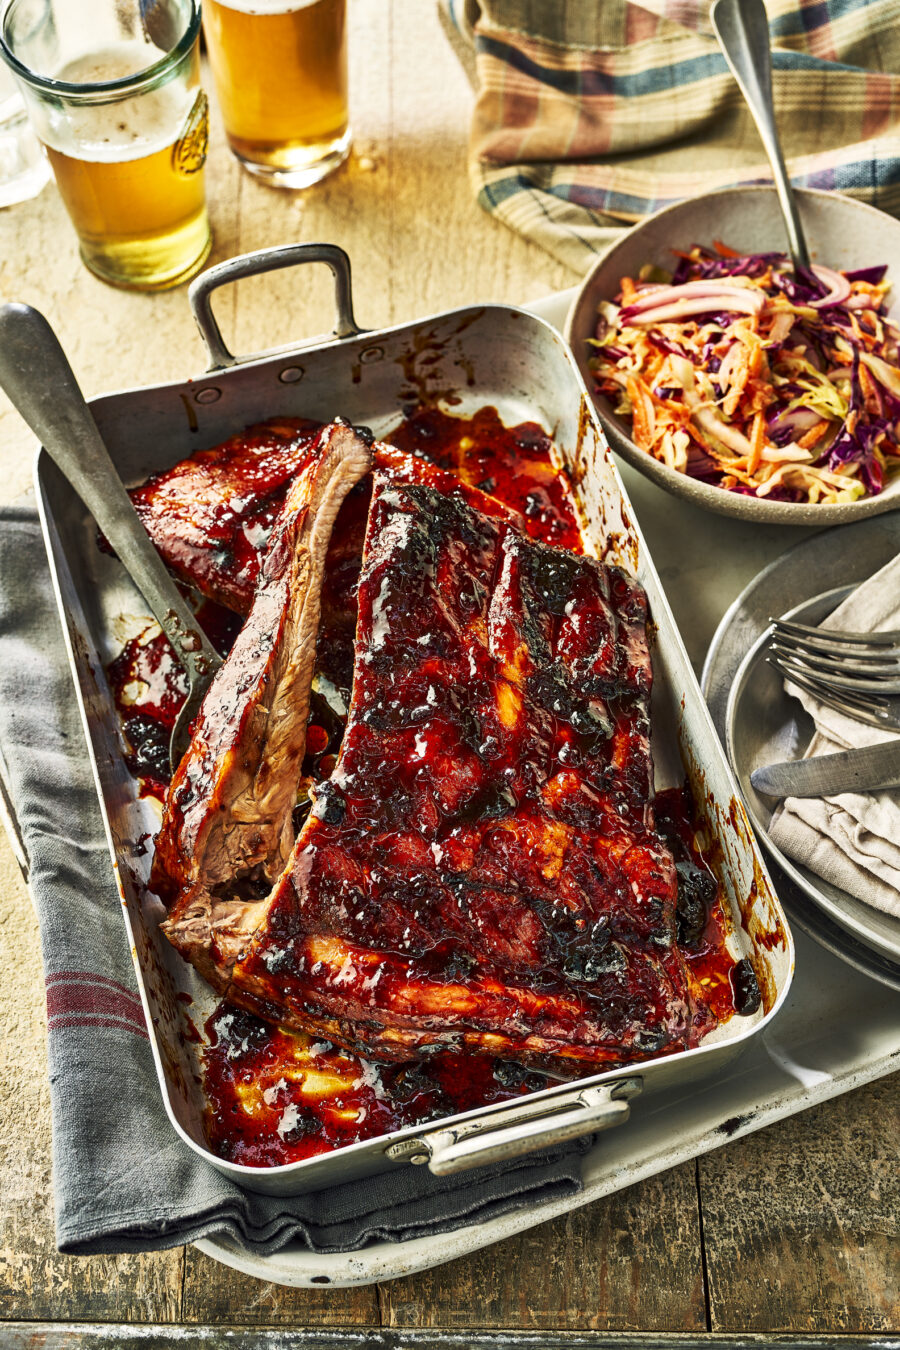 You have to try these BBQ recipes this weekend